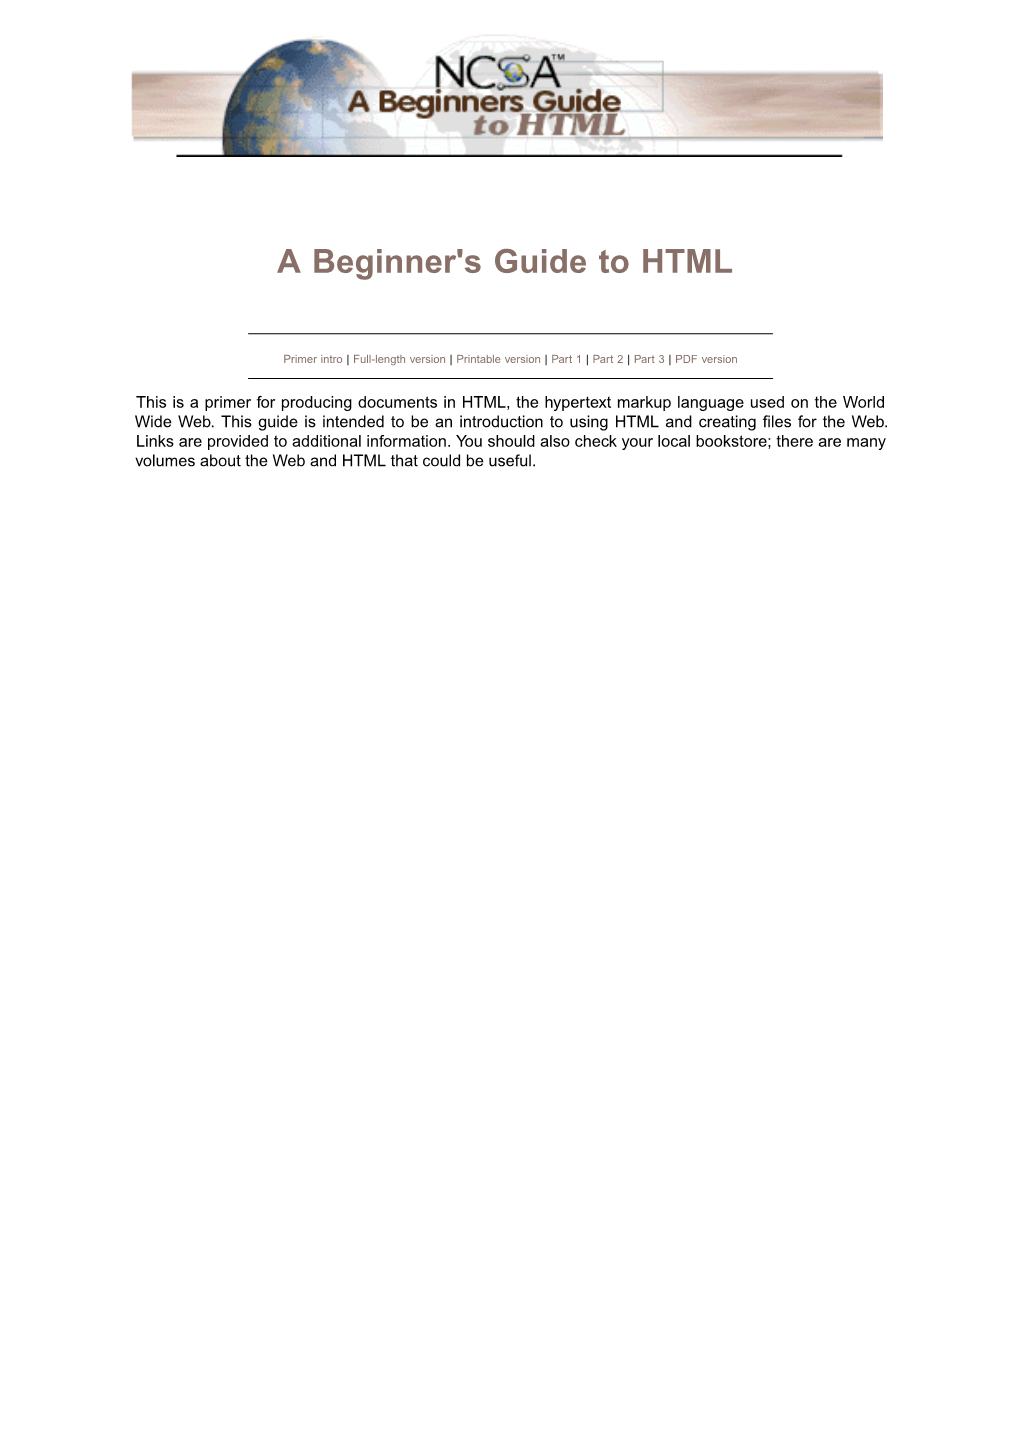 NCSA--A Beginner's Guide to HTML